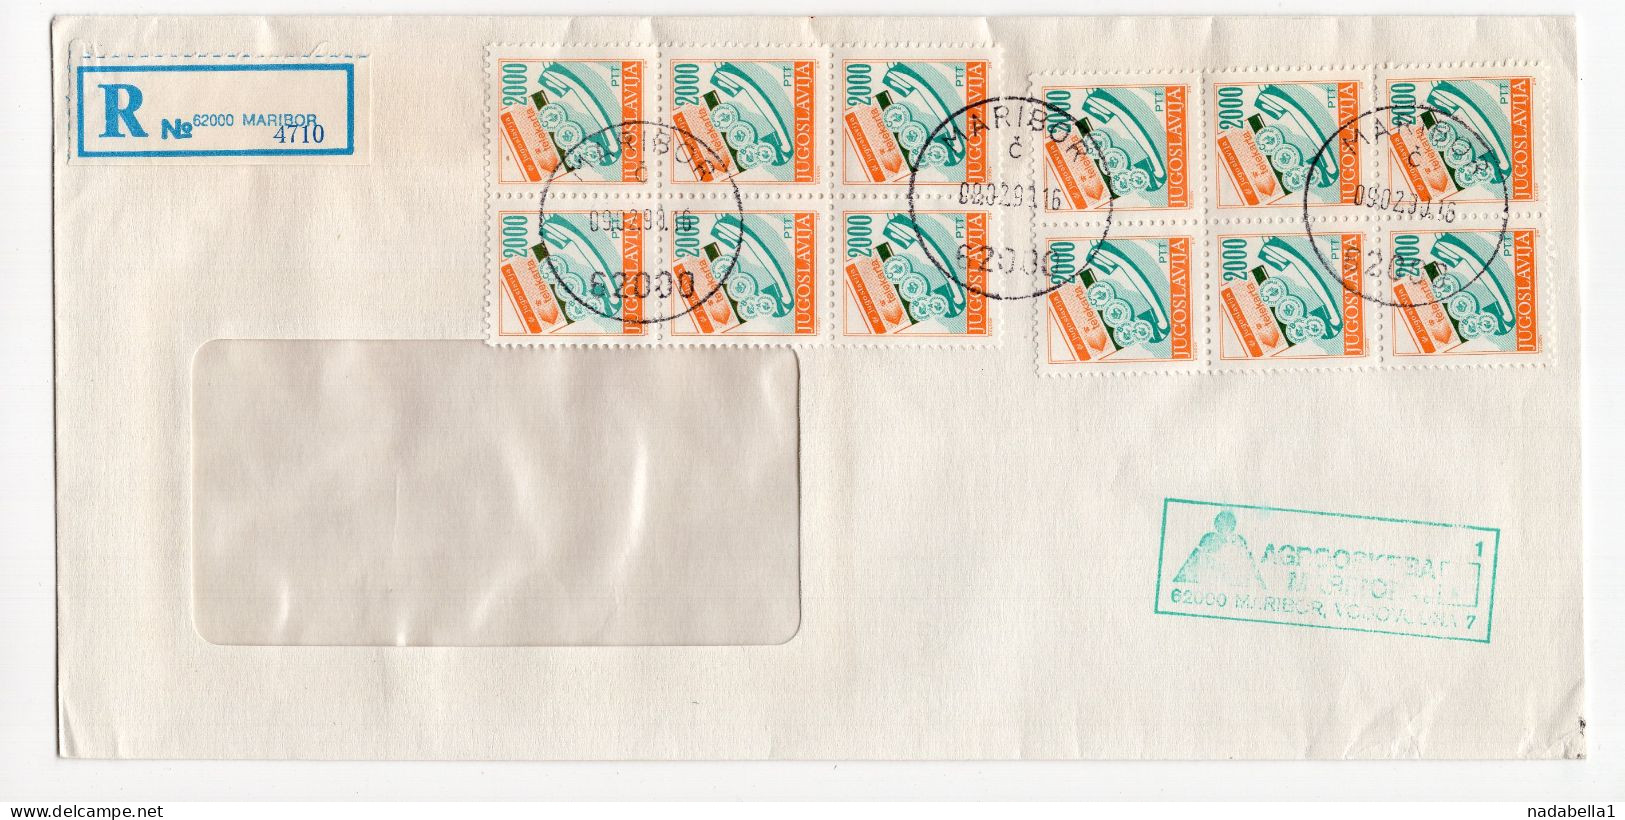 09.02.1990. INFLATIONARY MAIL,YUGOSLAVIA,SLOVENIA,MARIBOR RECORDED COVER,INFLATION - Lettres & Documents